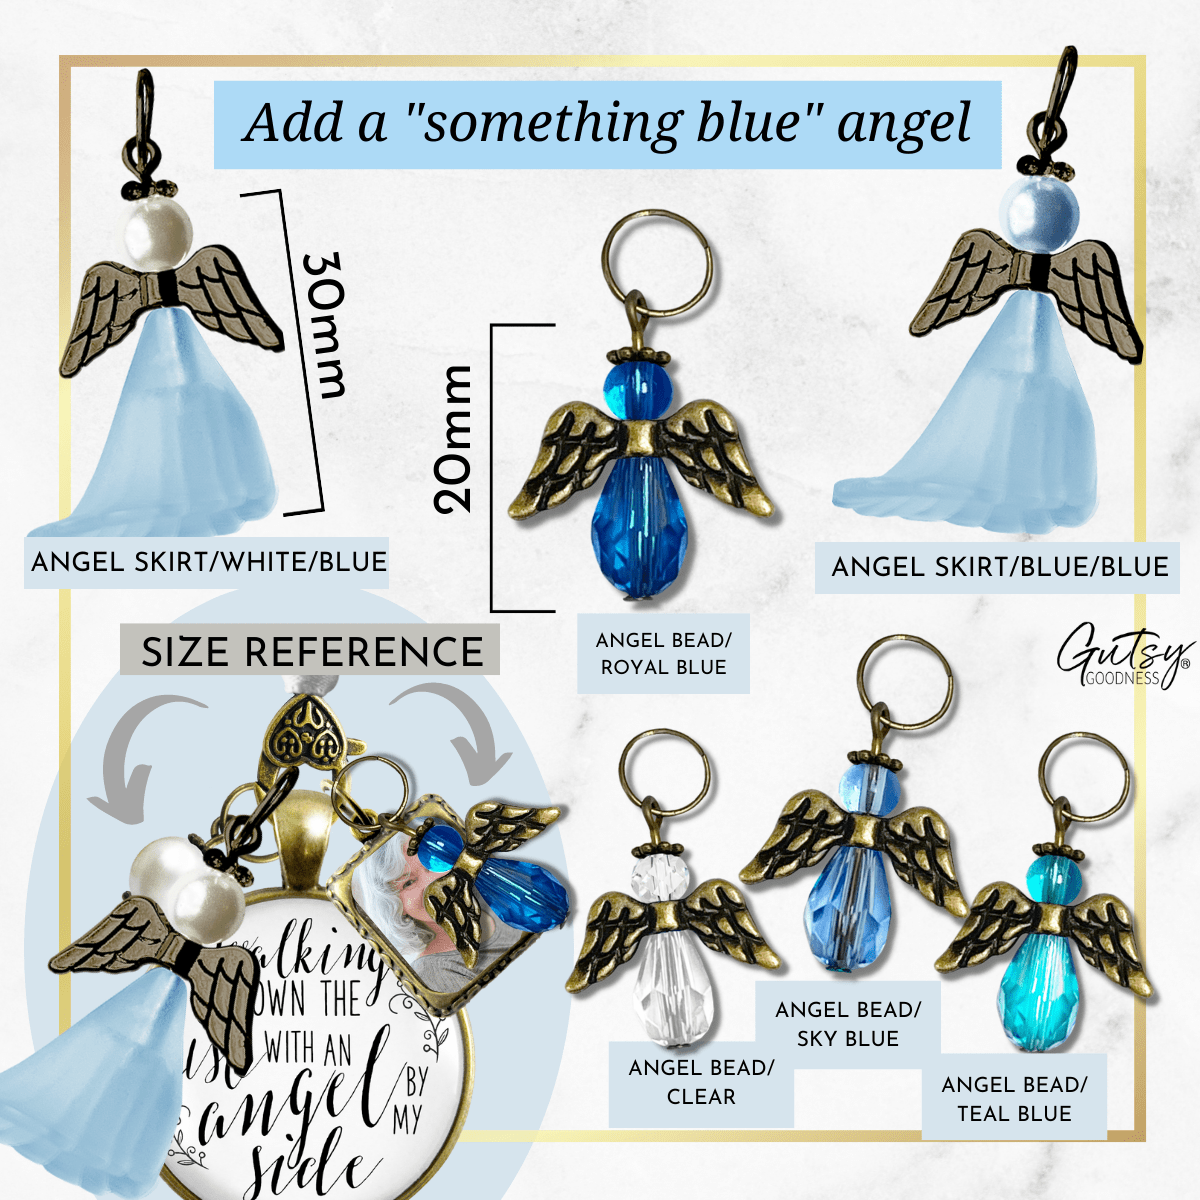 Walking Down The Aisle With An Angel By My Side - Memorial Bouquet Charm, Bronze, White Glass, Blue Pearl - 2 Frames  Bouquet Charm - Gutsy Goodness Handmade Jewelry